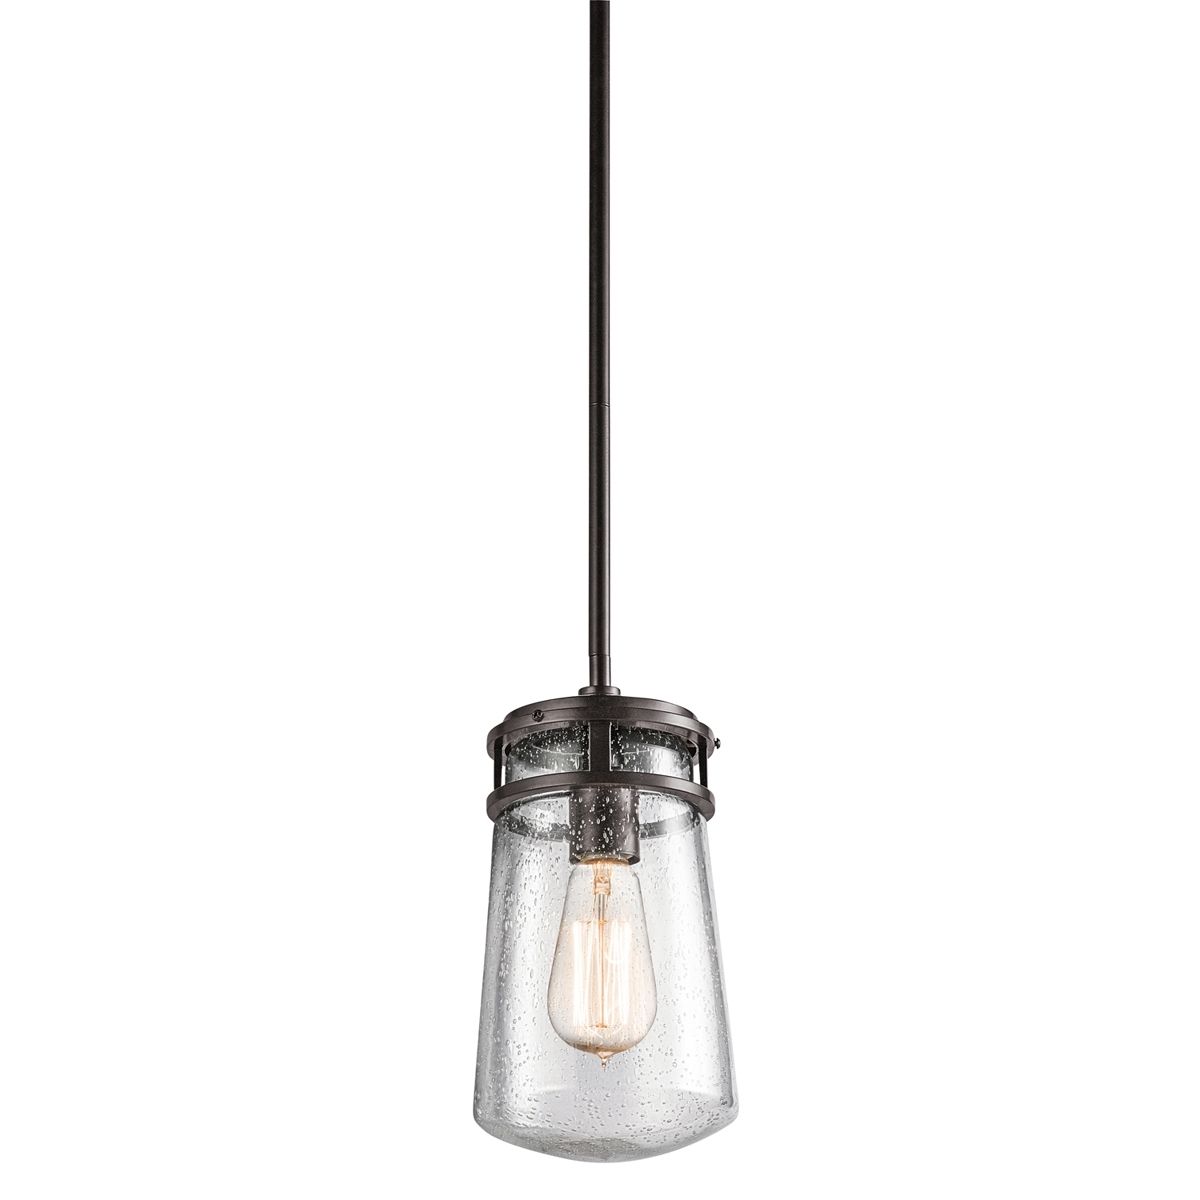 Pendant Lighting Ideas: Top Outdoor Hanging Pendant Lights Over Throughout Small Outdoor Ceiling Lights (View 3 of 15)